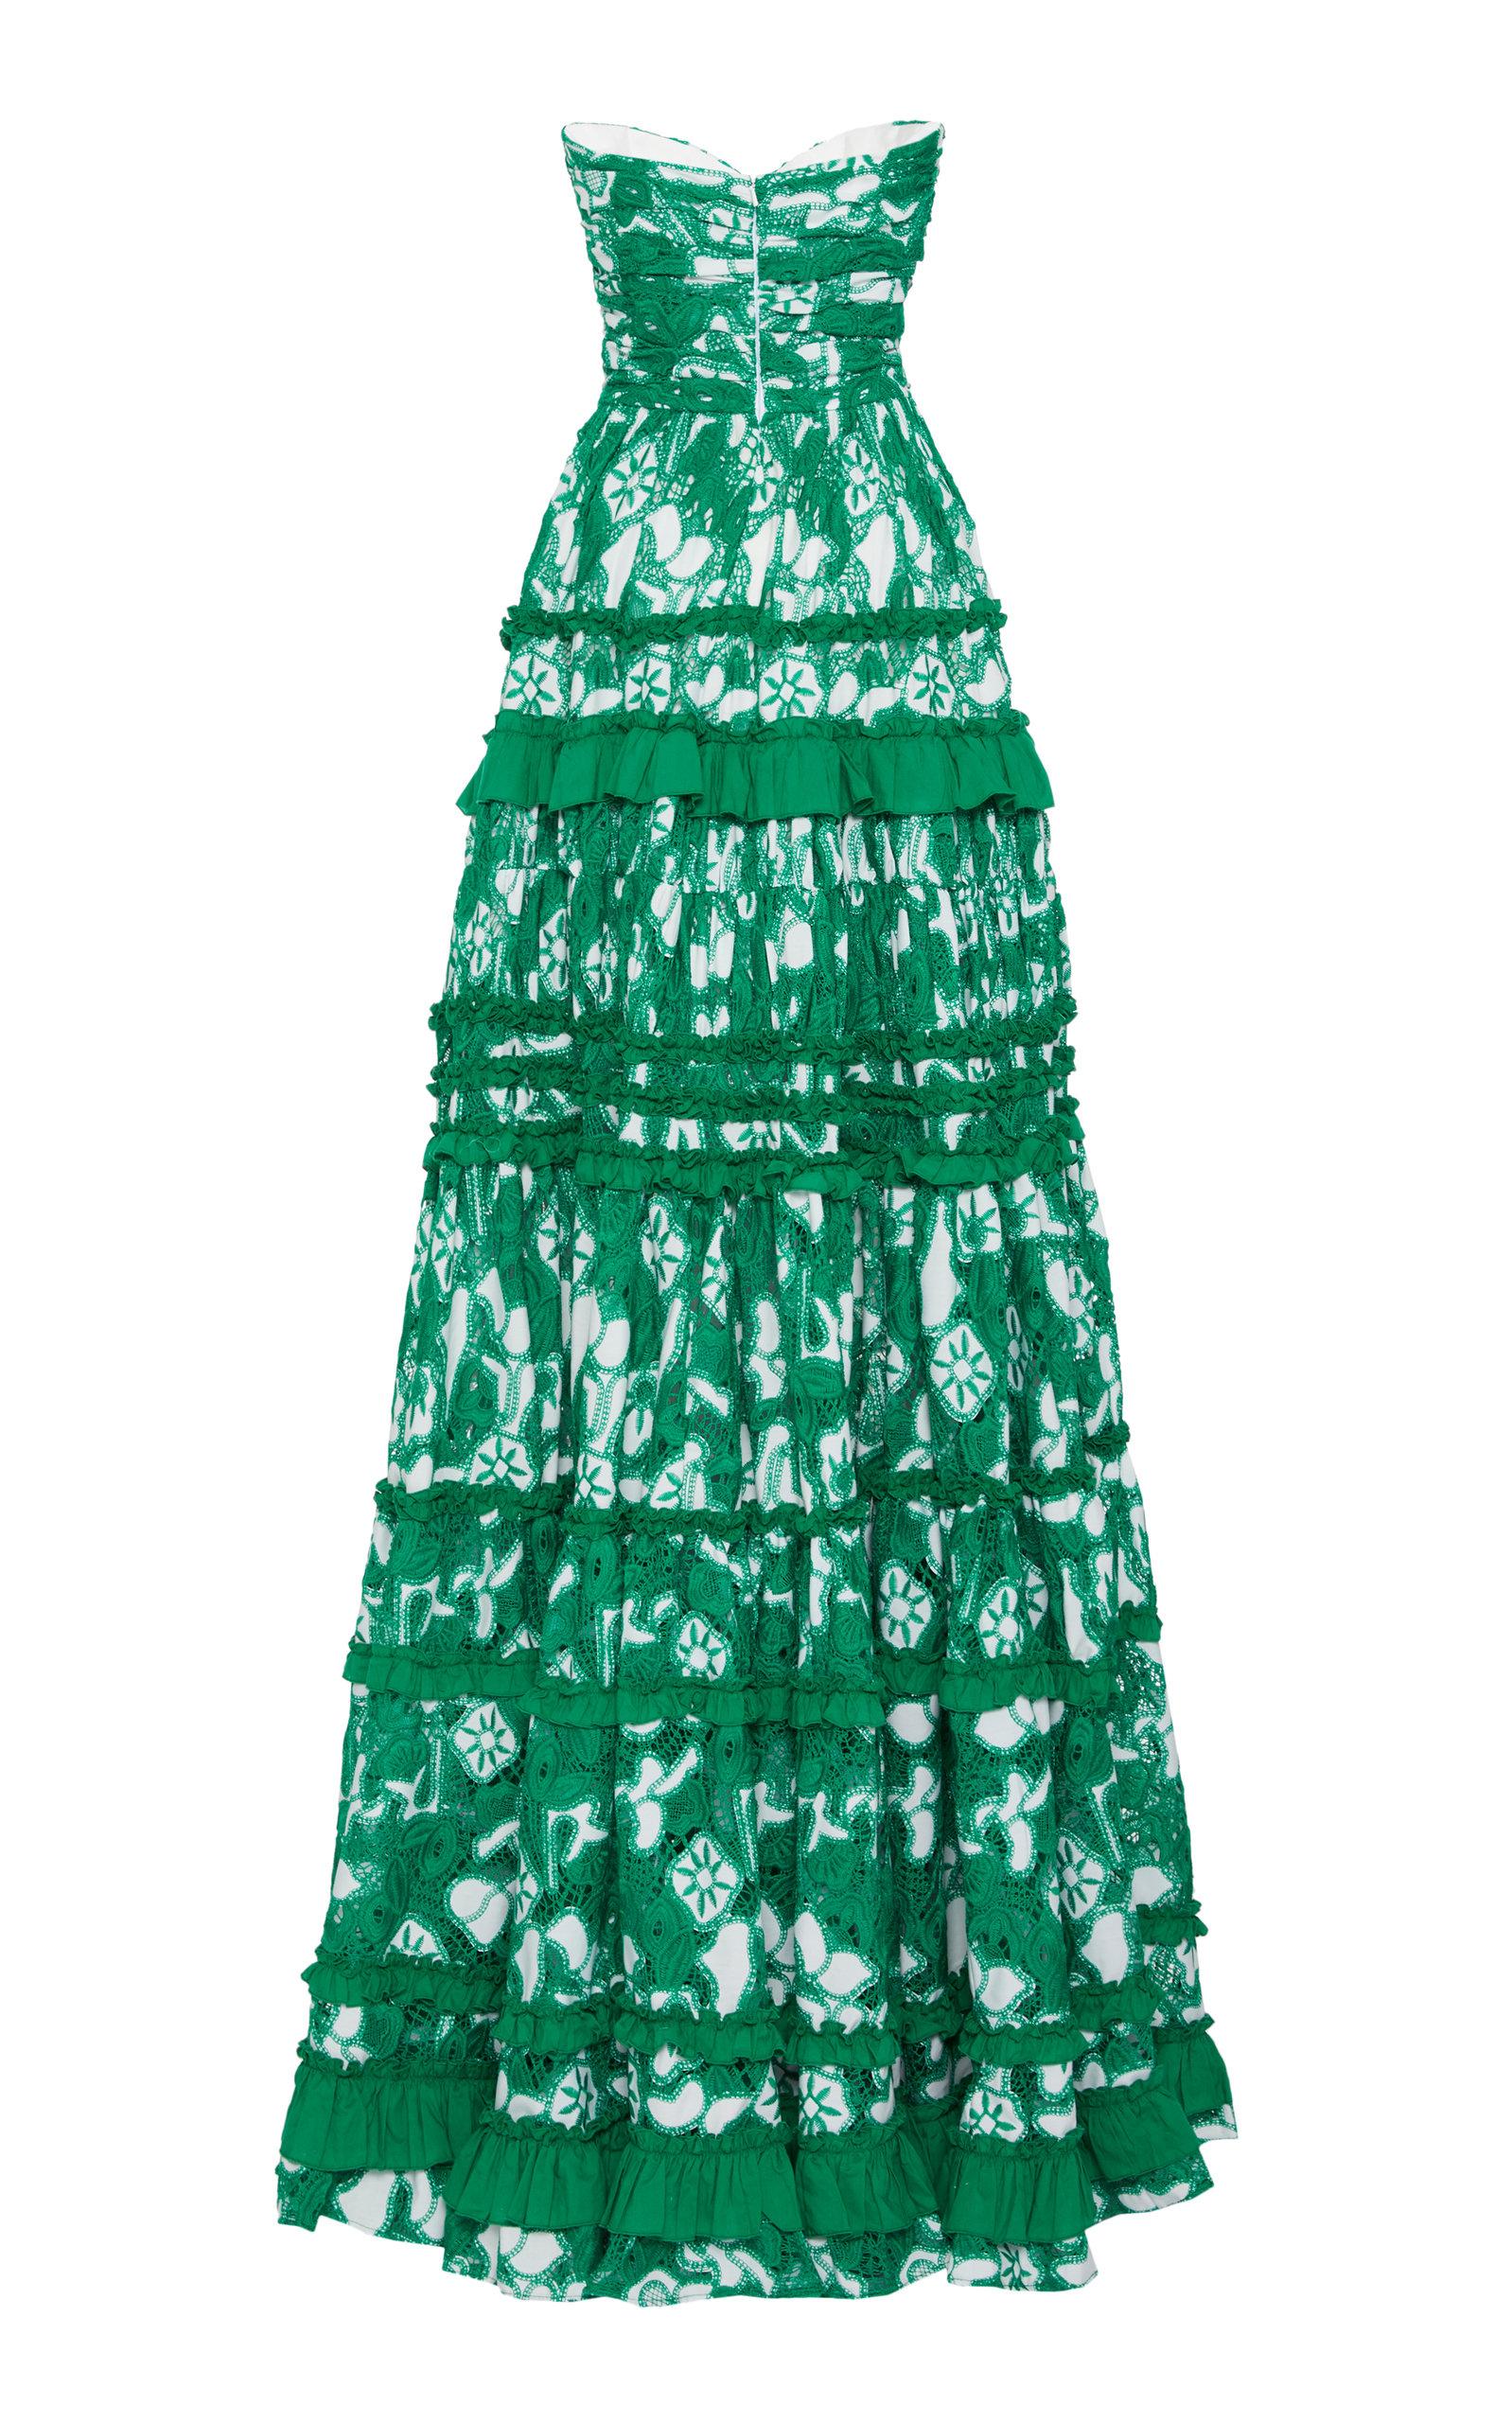 Alexis Samanta Tiered Ruffle Cotton Dress in Green | Lyst